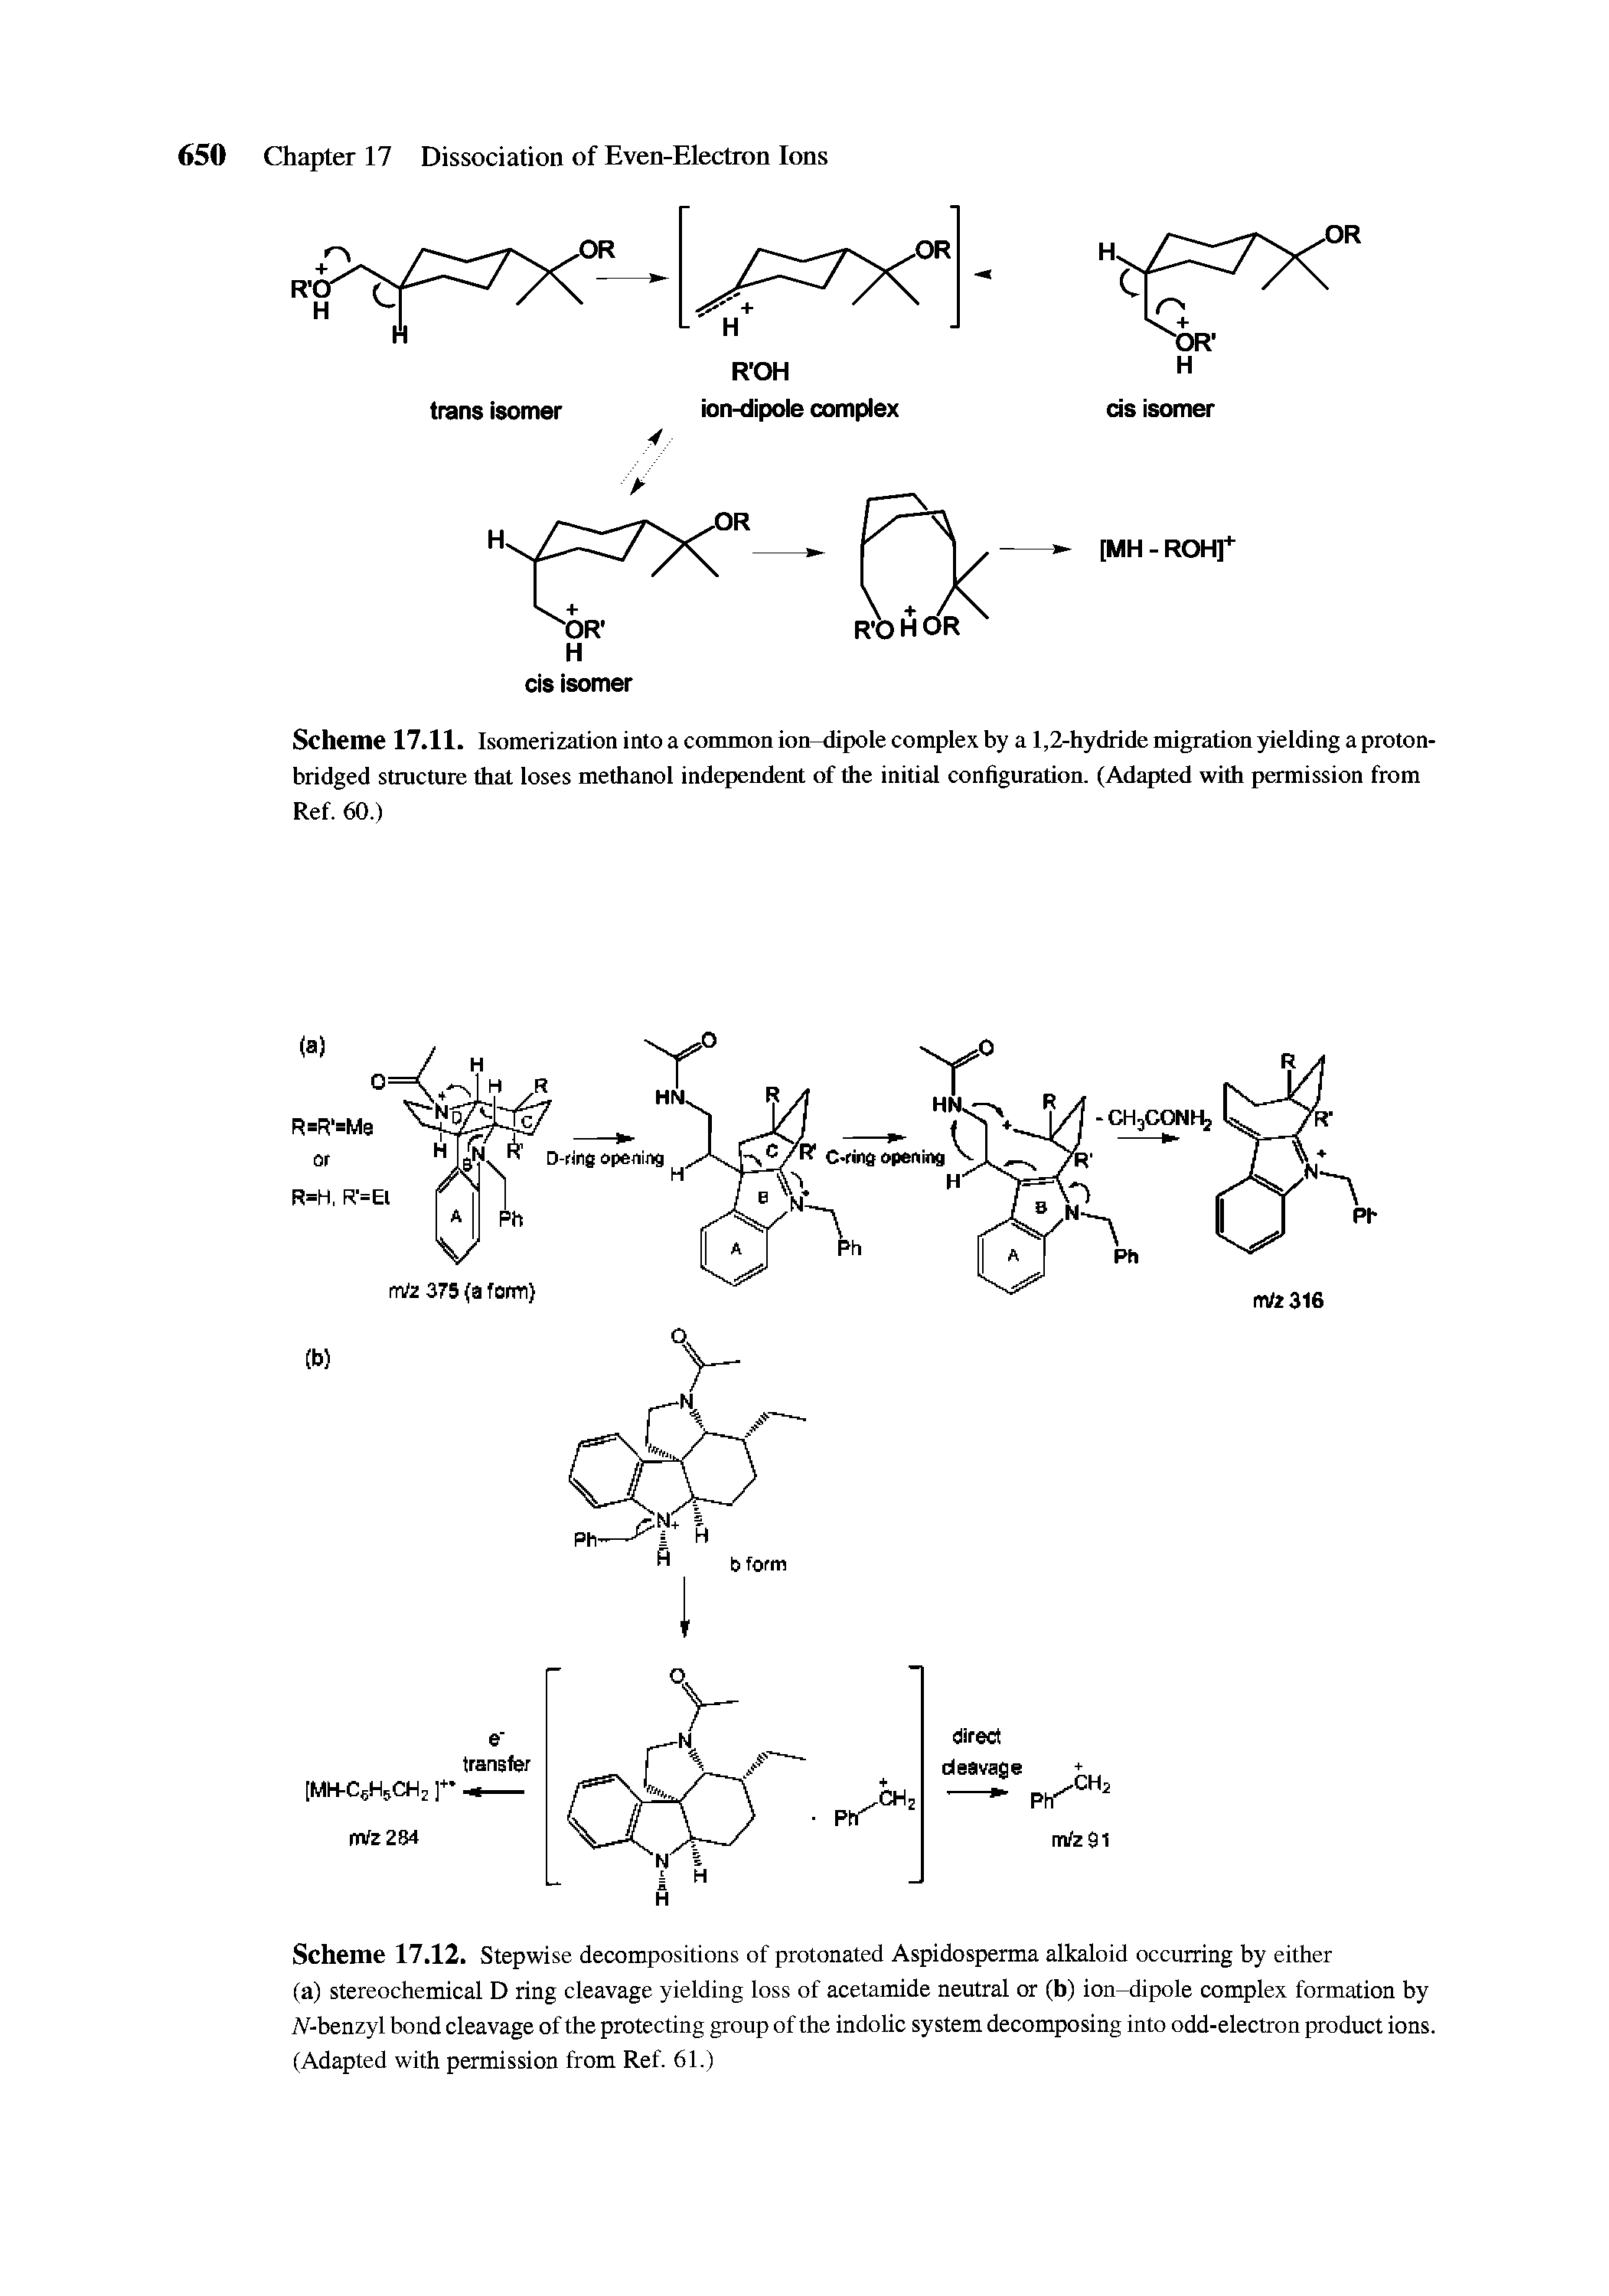 Scheme 17.12. Stepwise decompositions of protonated Aspidosperma alkaloid occurring by either (a) stereochemical D ring cleavage yielding loss of acetamide neutral or (b) ion-dipole complex formation by A-benzyl bond cleavage of the protecting group of the indolic system decomposing into odd-electron product ions. (Adapted with permission from Ref 61.)...